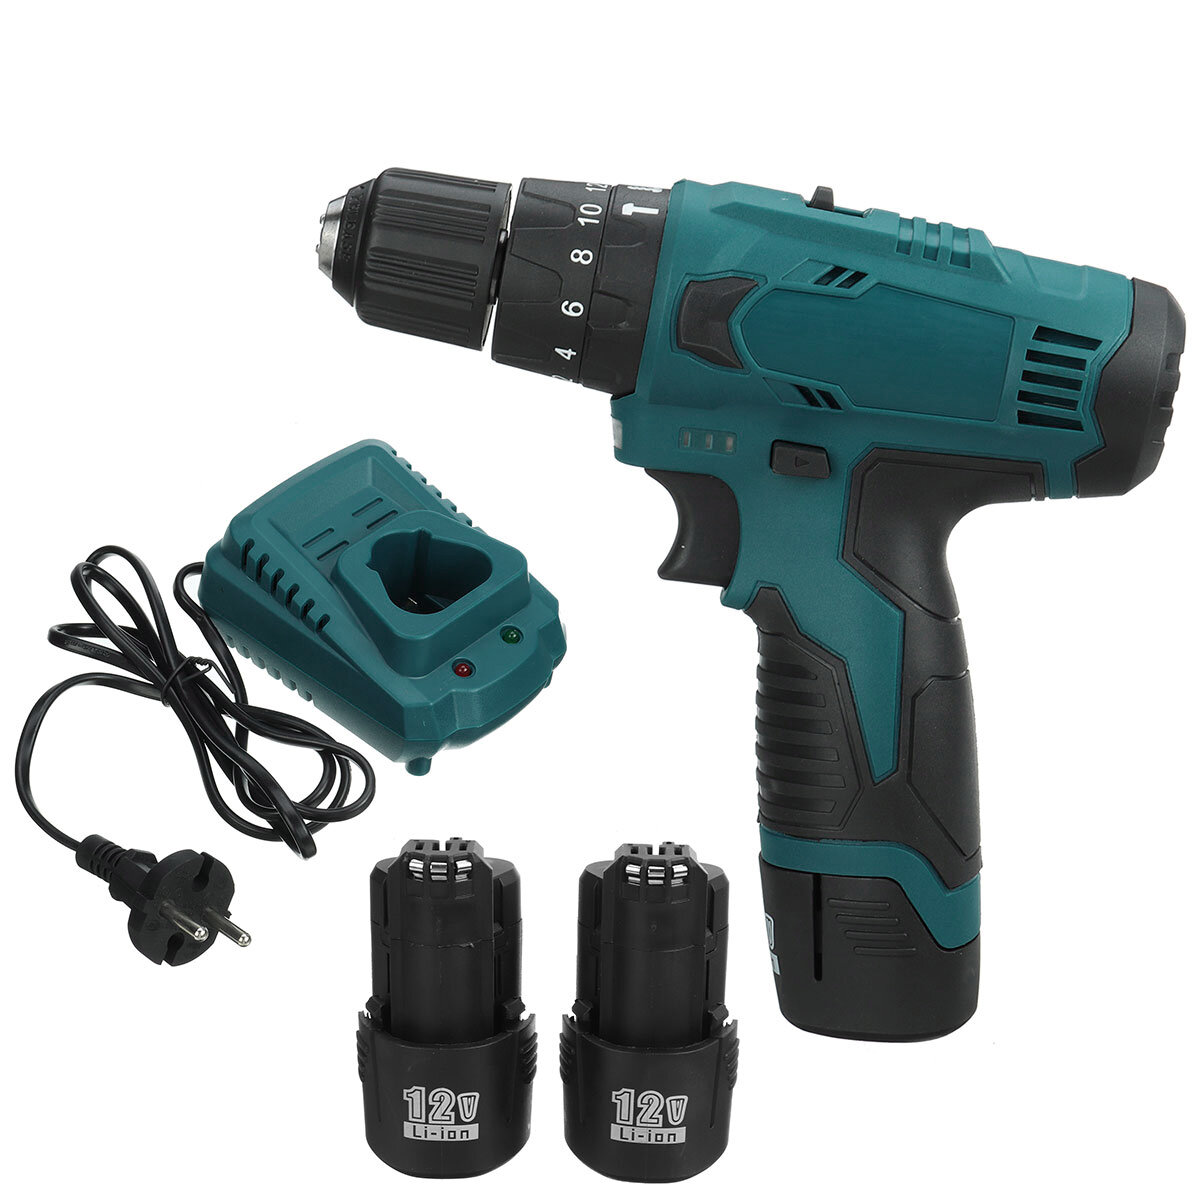 Image of 12V 1500mAh 3 IN 1 2 Speed Cordless Drill Driver Electric Screwdriver Hammer Flat Drill 18+3 Torque 10mm W/ None/1/2 Bat